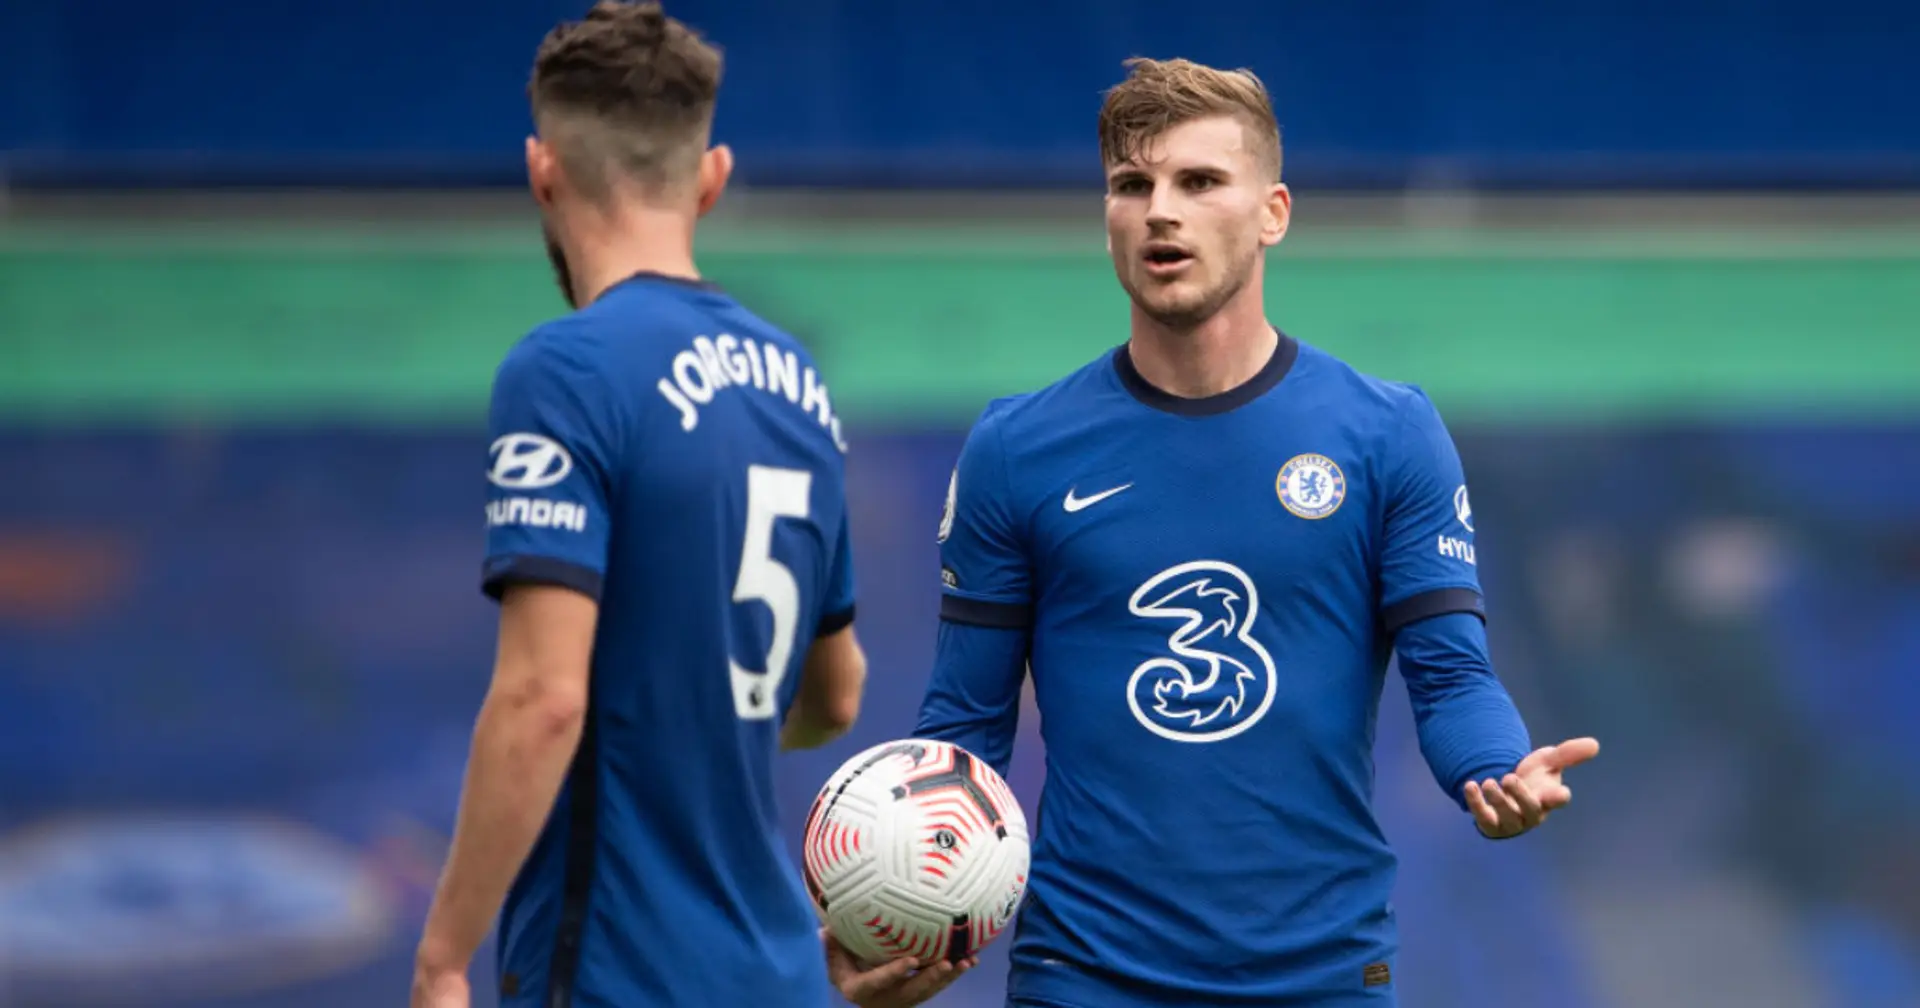 2 bold tweaks in the formation in order to bring out the best in Werner and the entire Chelsea squad